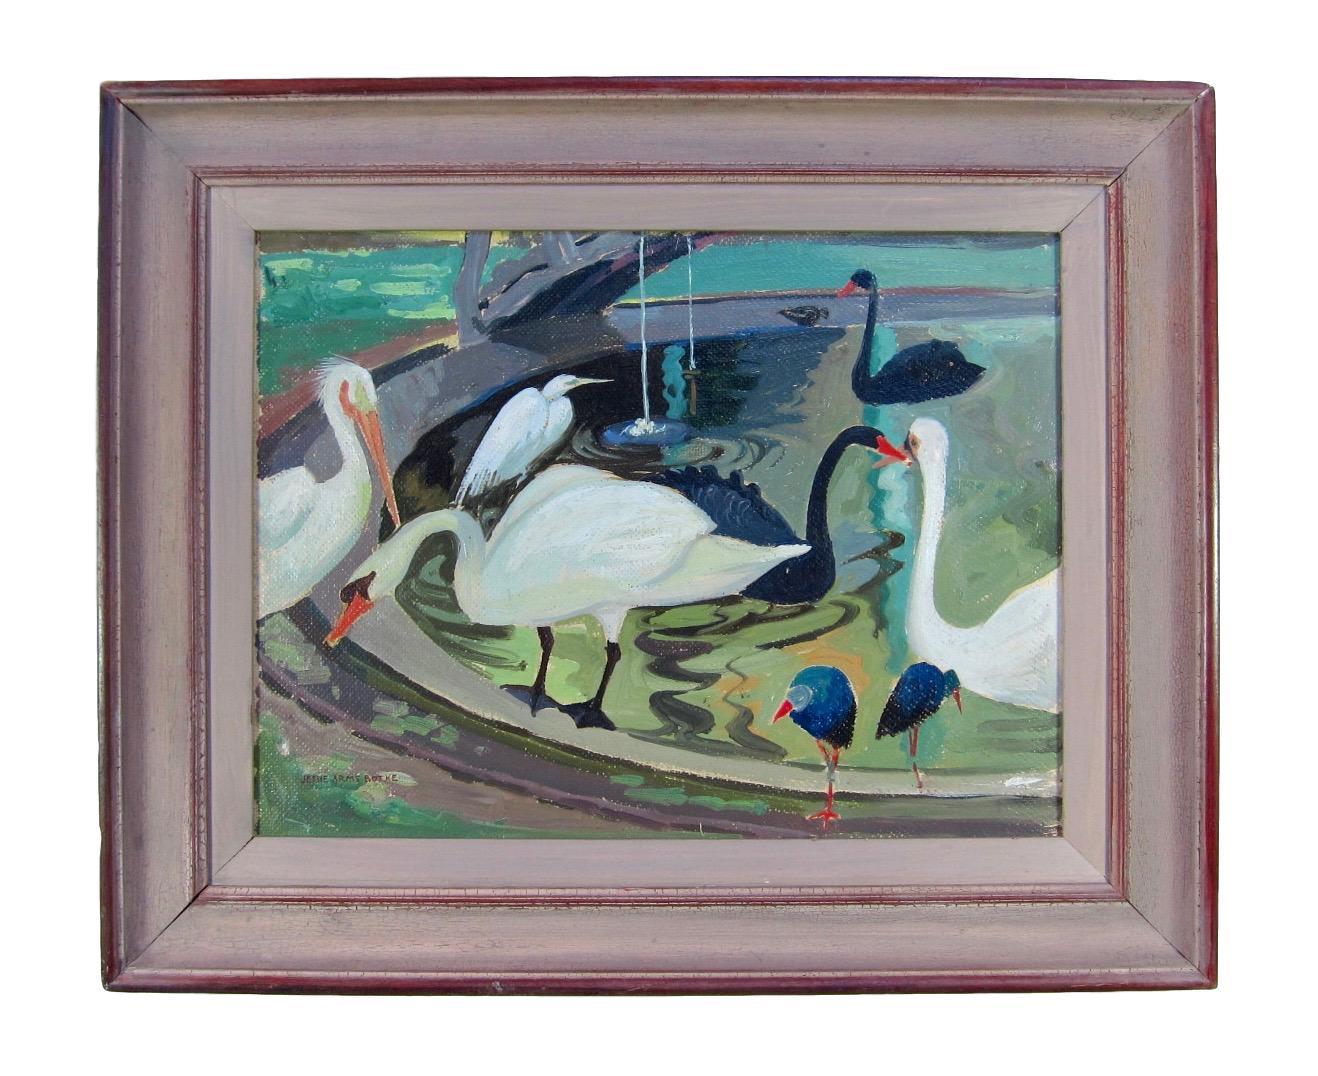 Description:  Oil painting of birds at an aviary in Santa Paula, CA by California artist Jessie Arms Botke.

Media: Oil on canvas laid down on a masonite panel.

Title: 